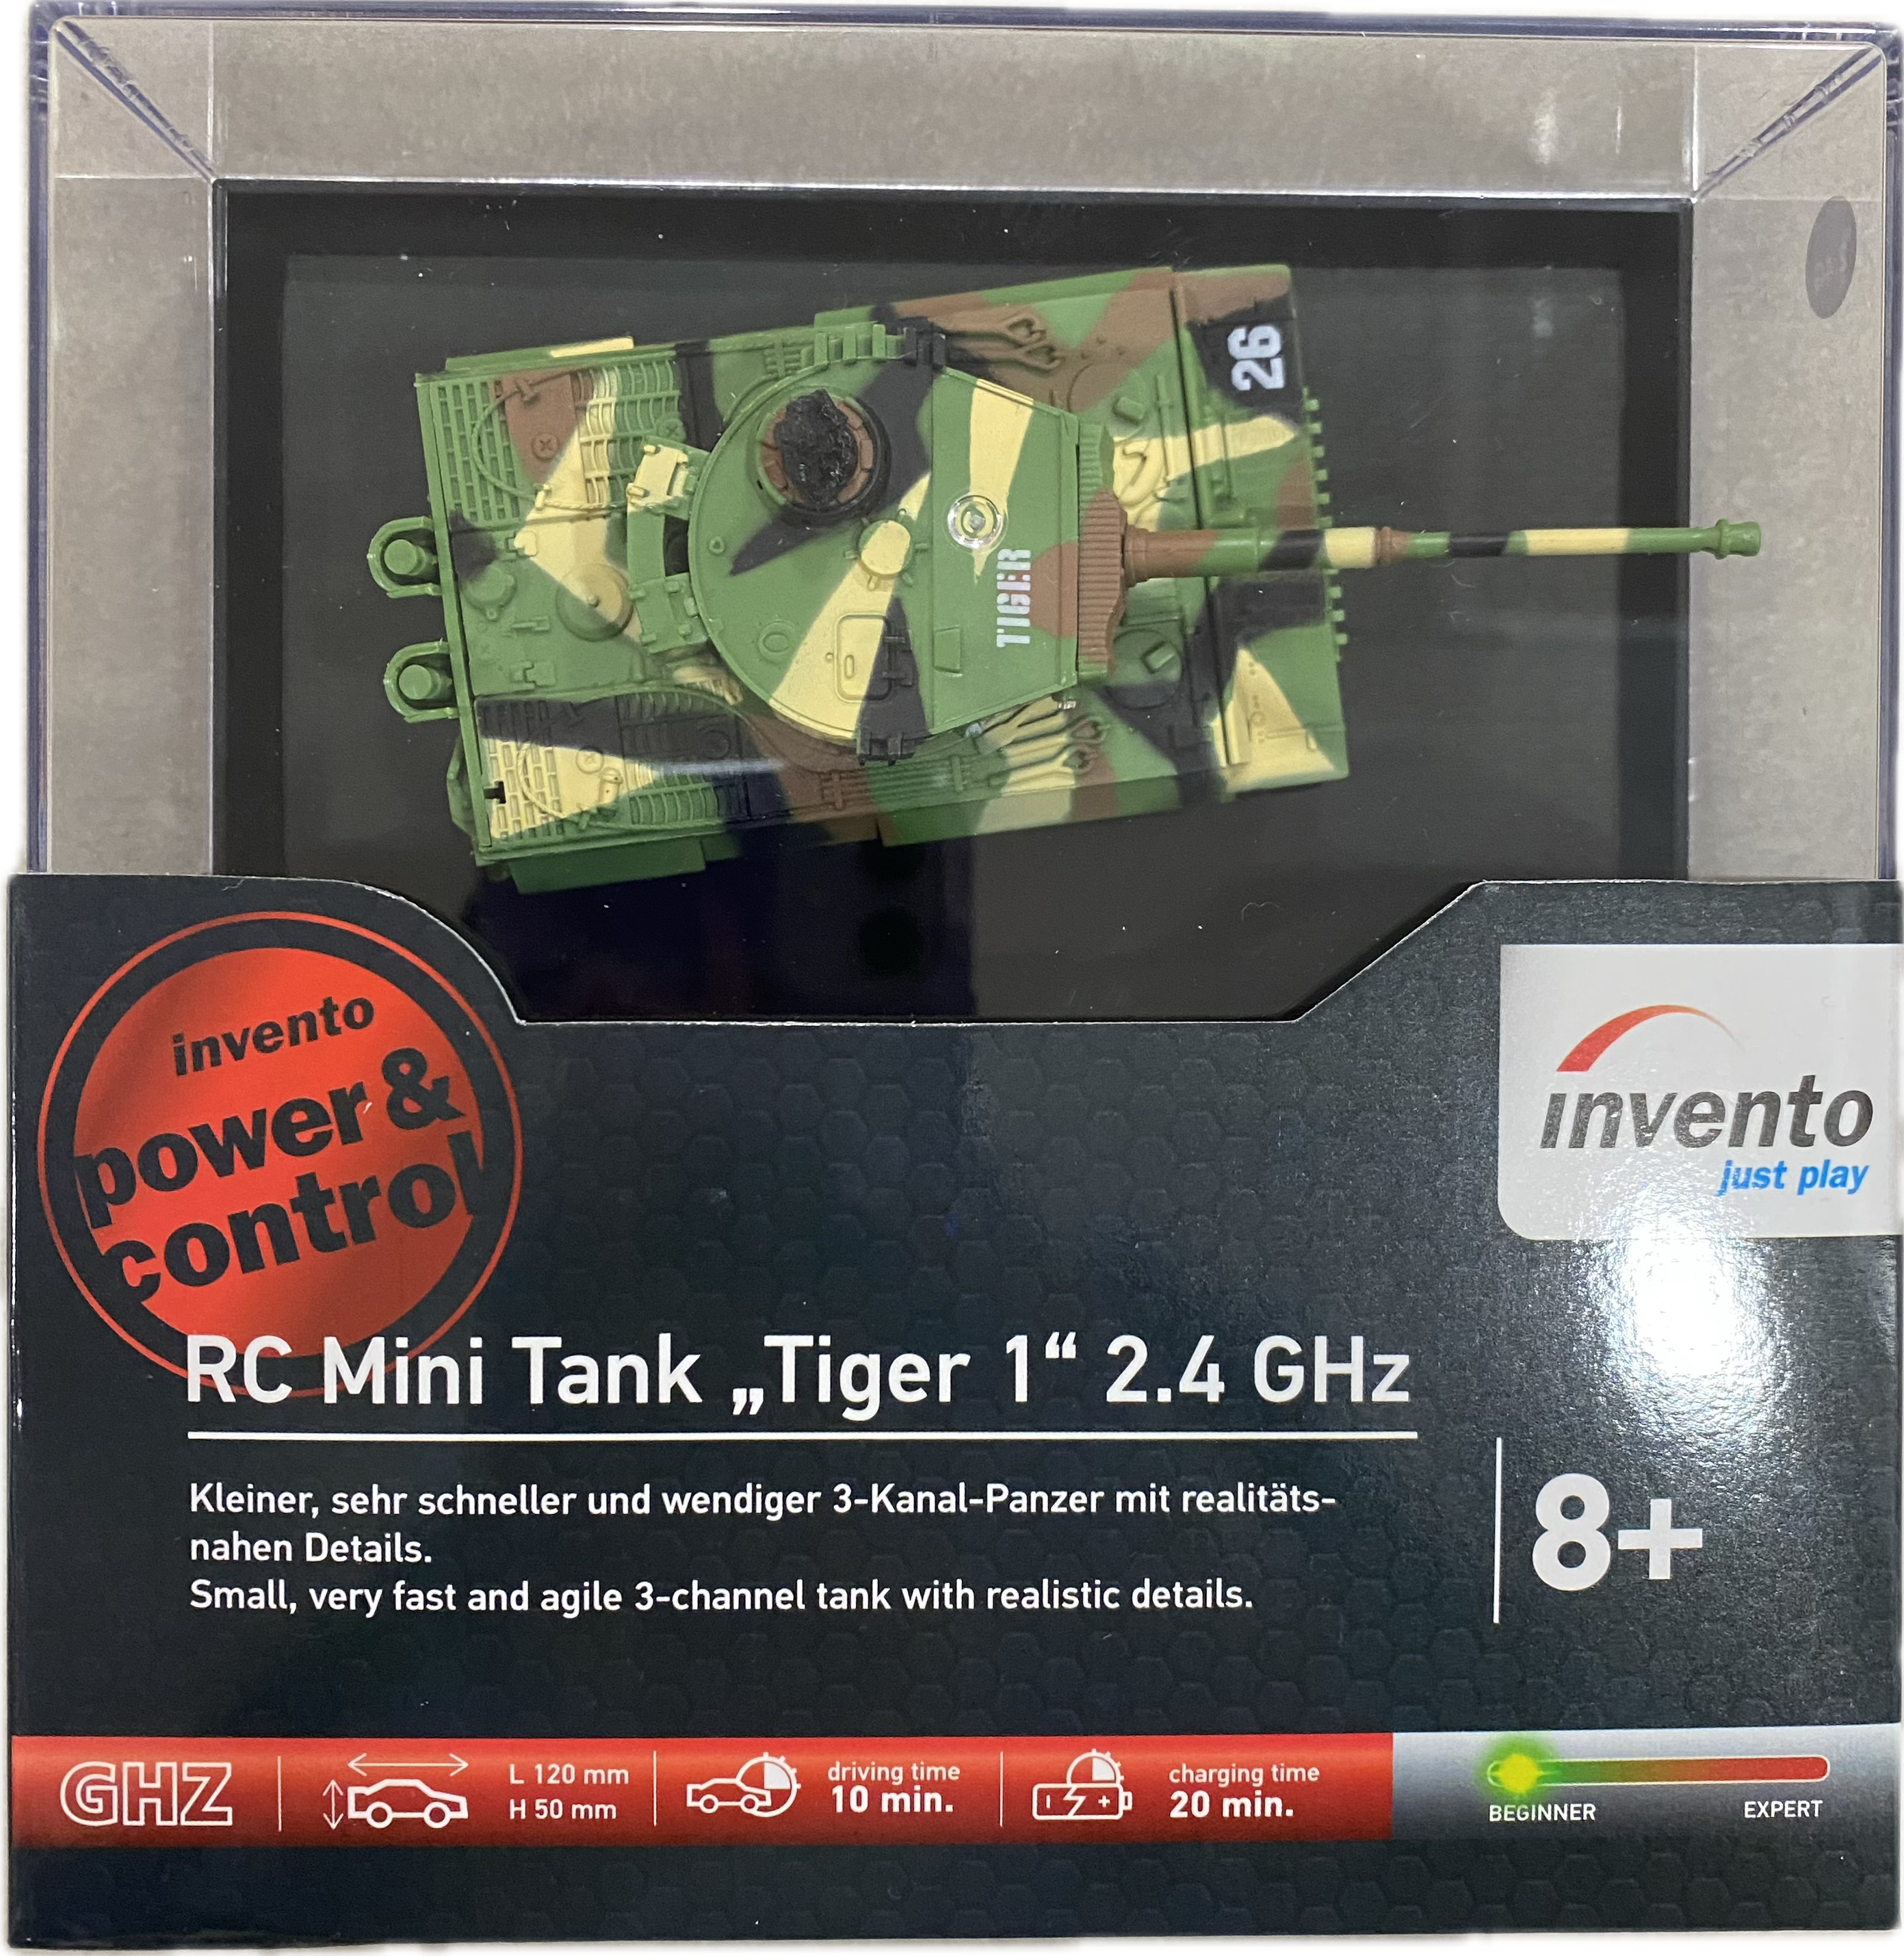 Invento RC Mini Tank Tiger 1" 2.4 GHz (Assorted Colors) 500072